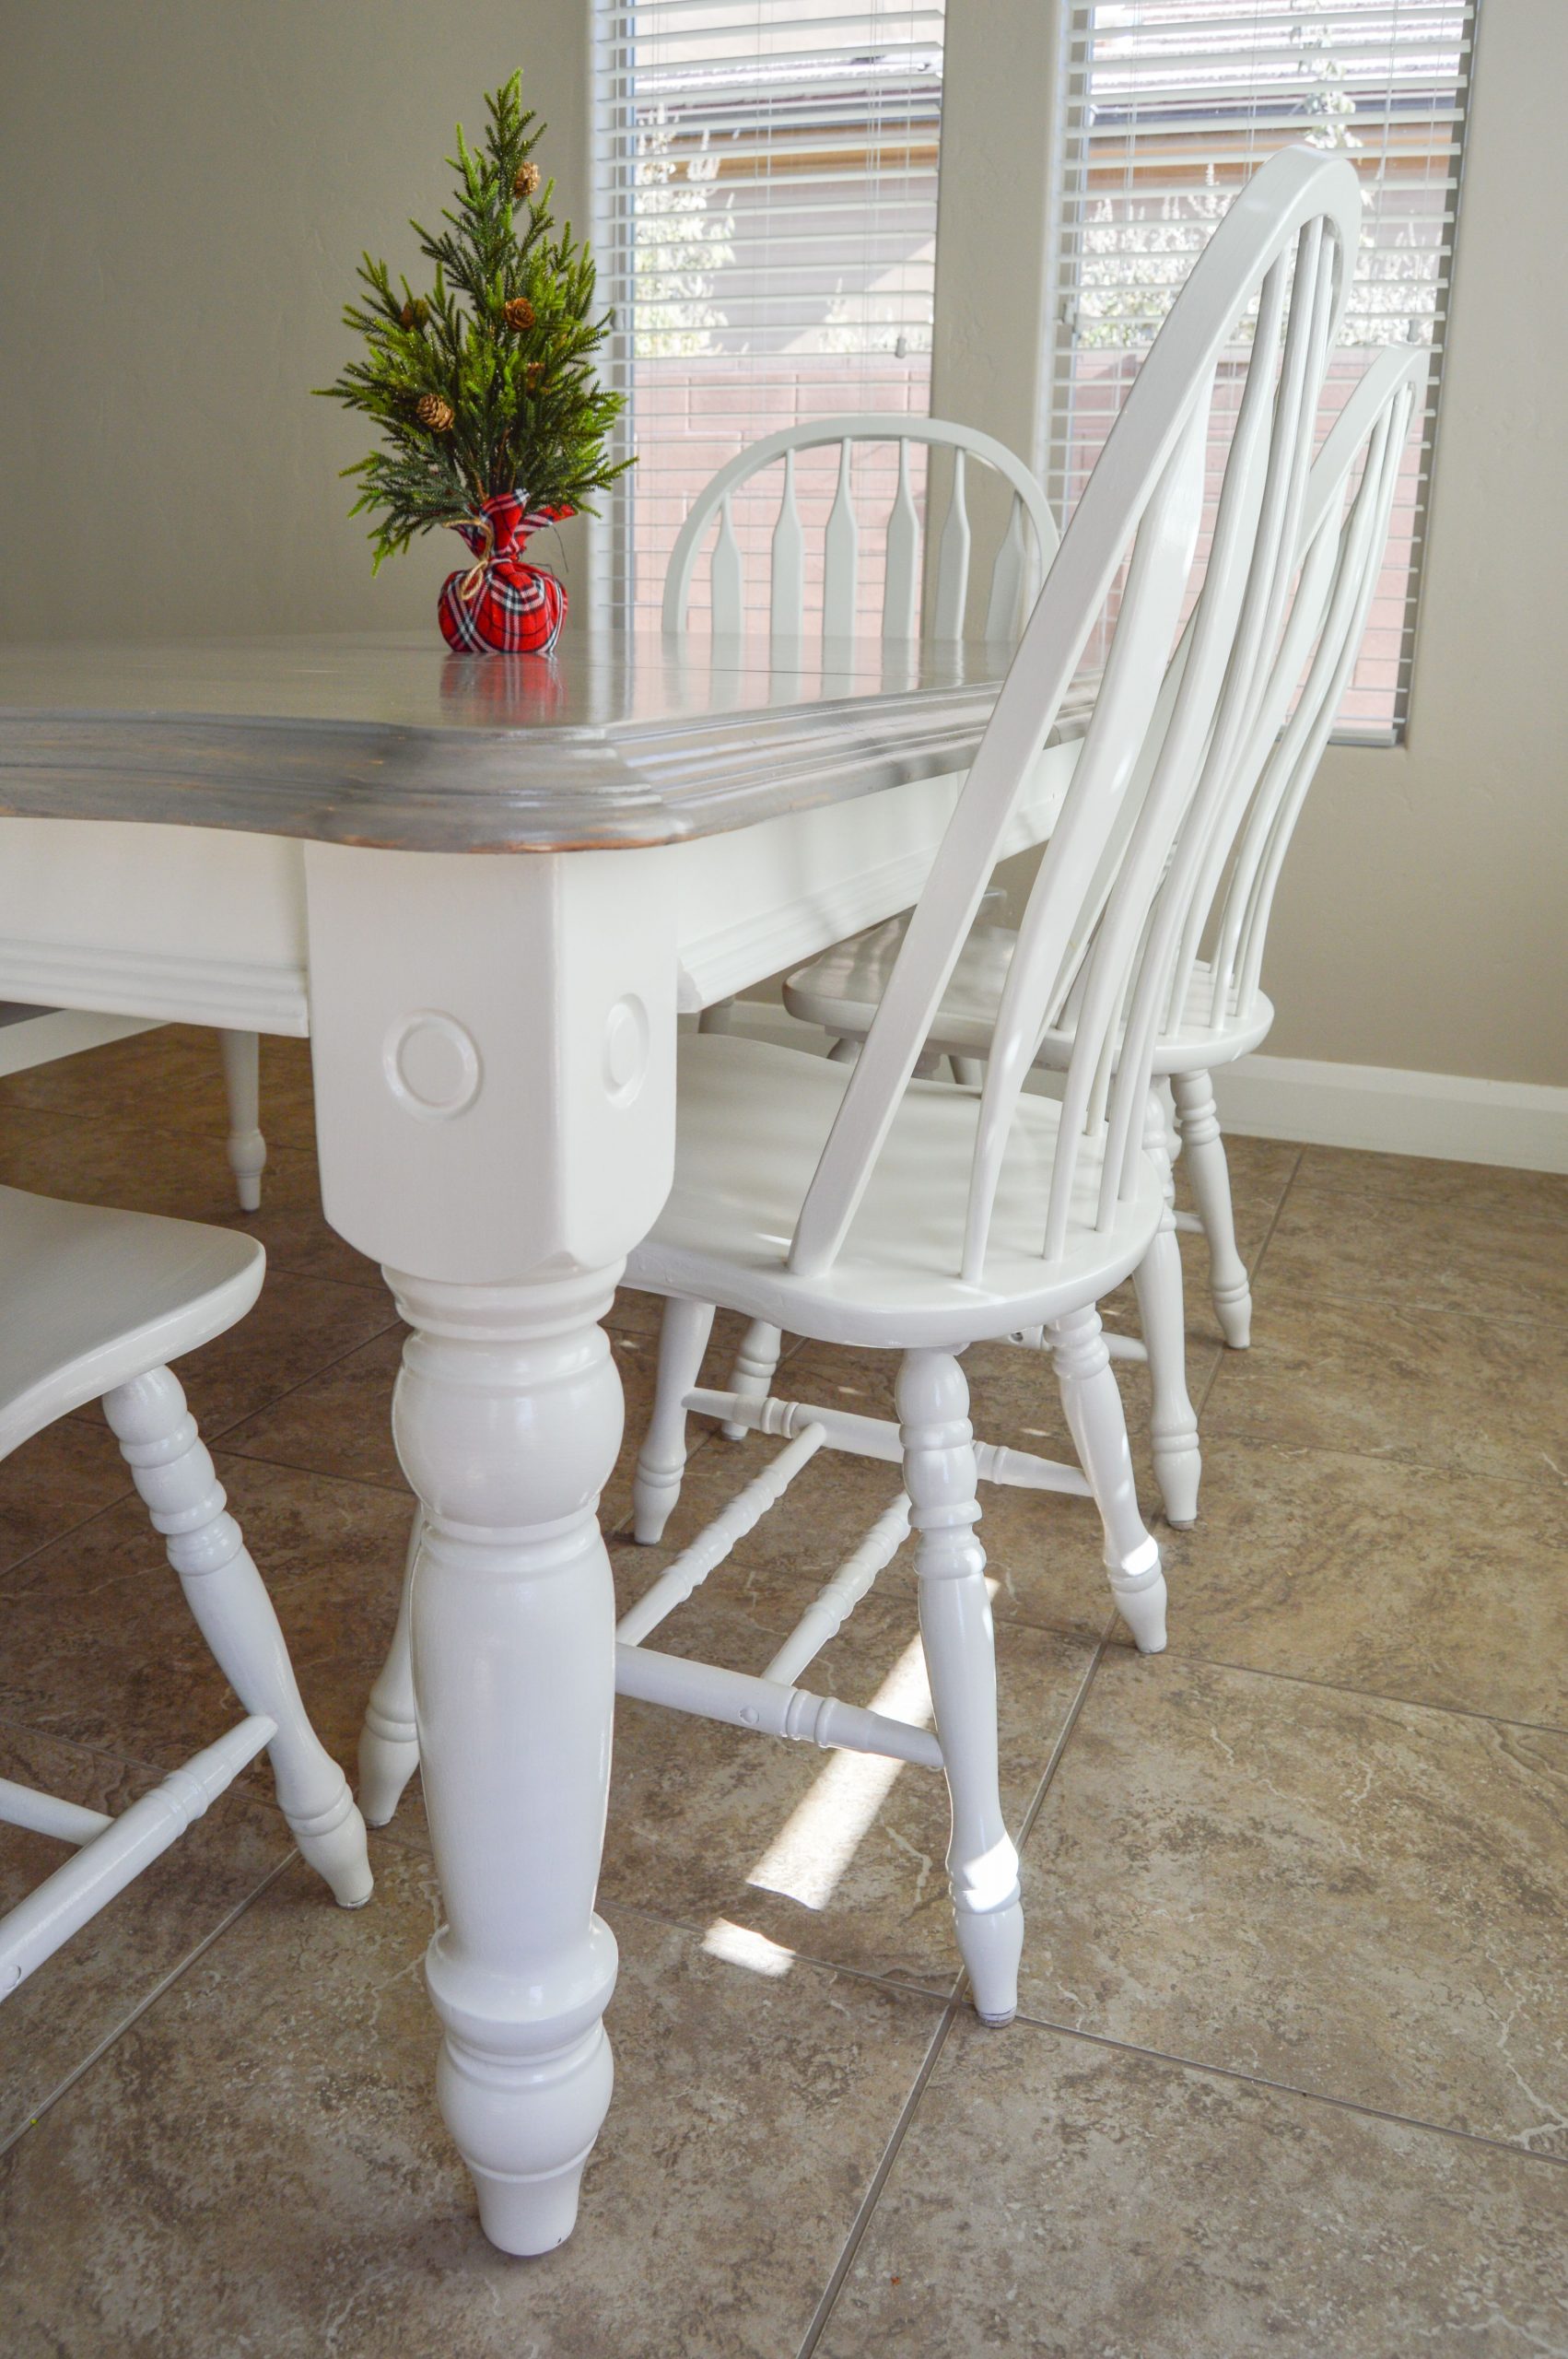 Diy Grey Paint Wash Dining Table Chairs Painted Dining in sizing 3191 X 4800